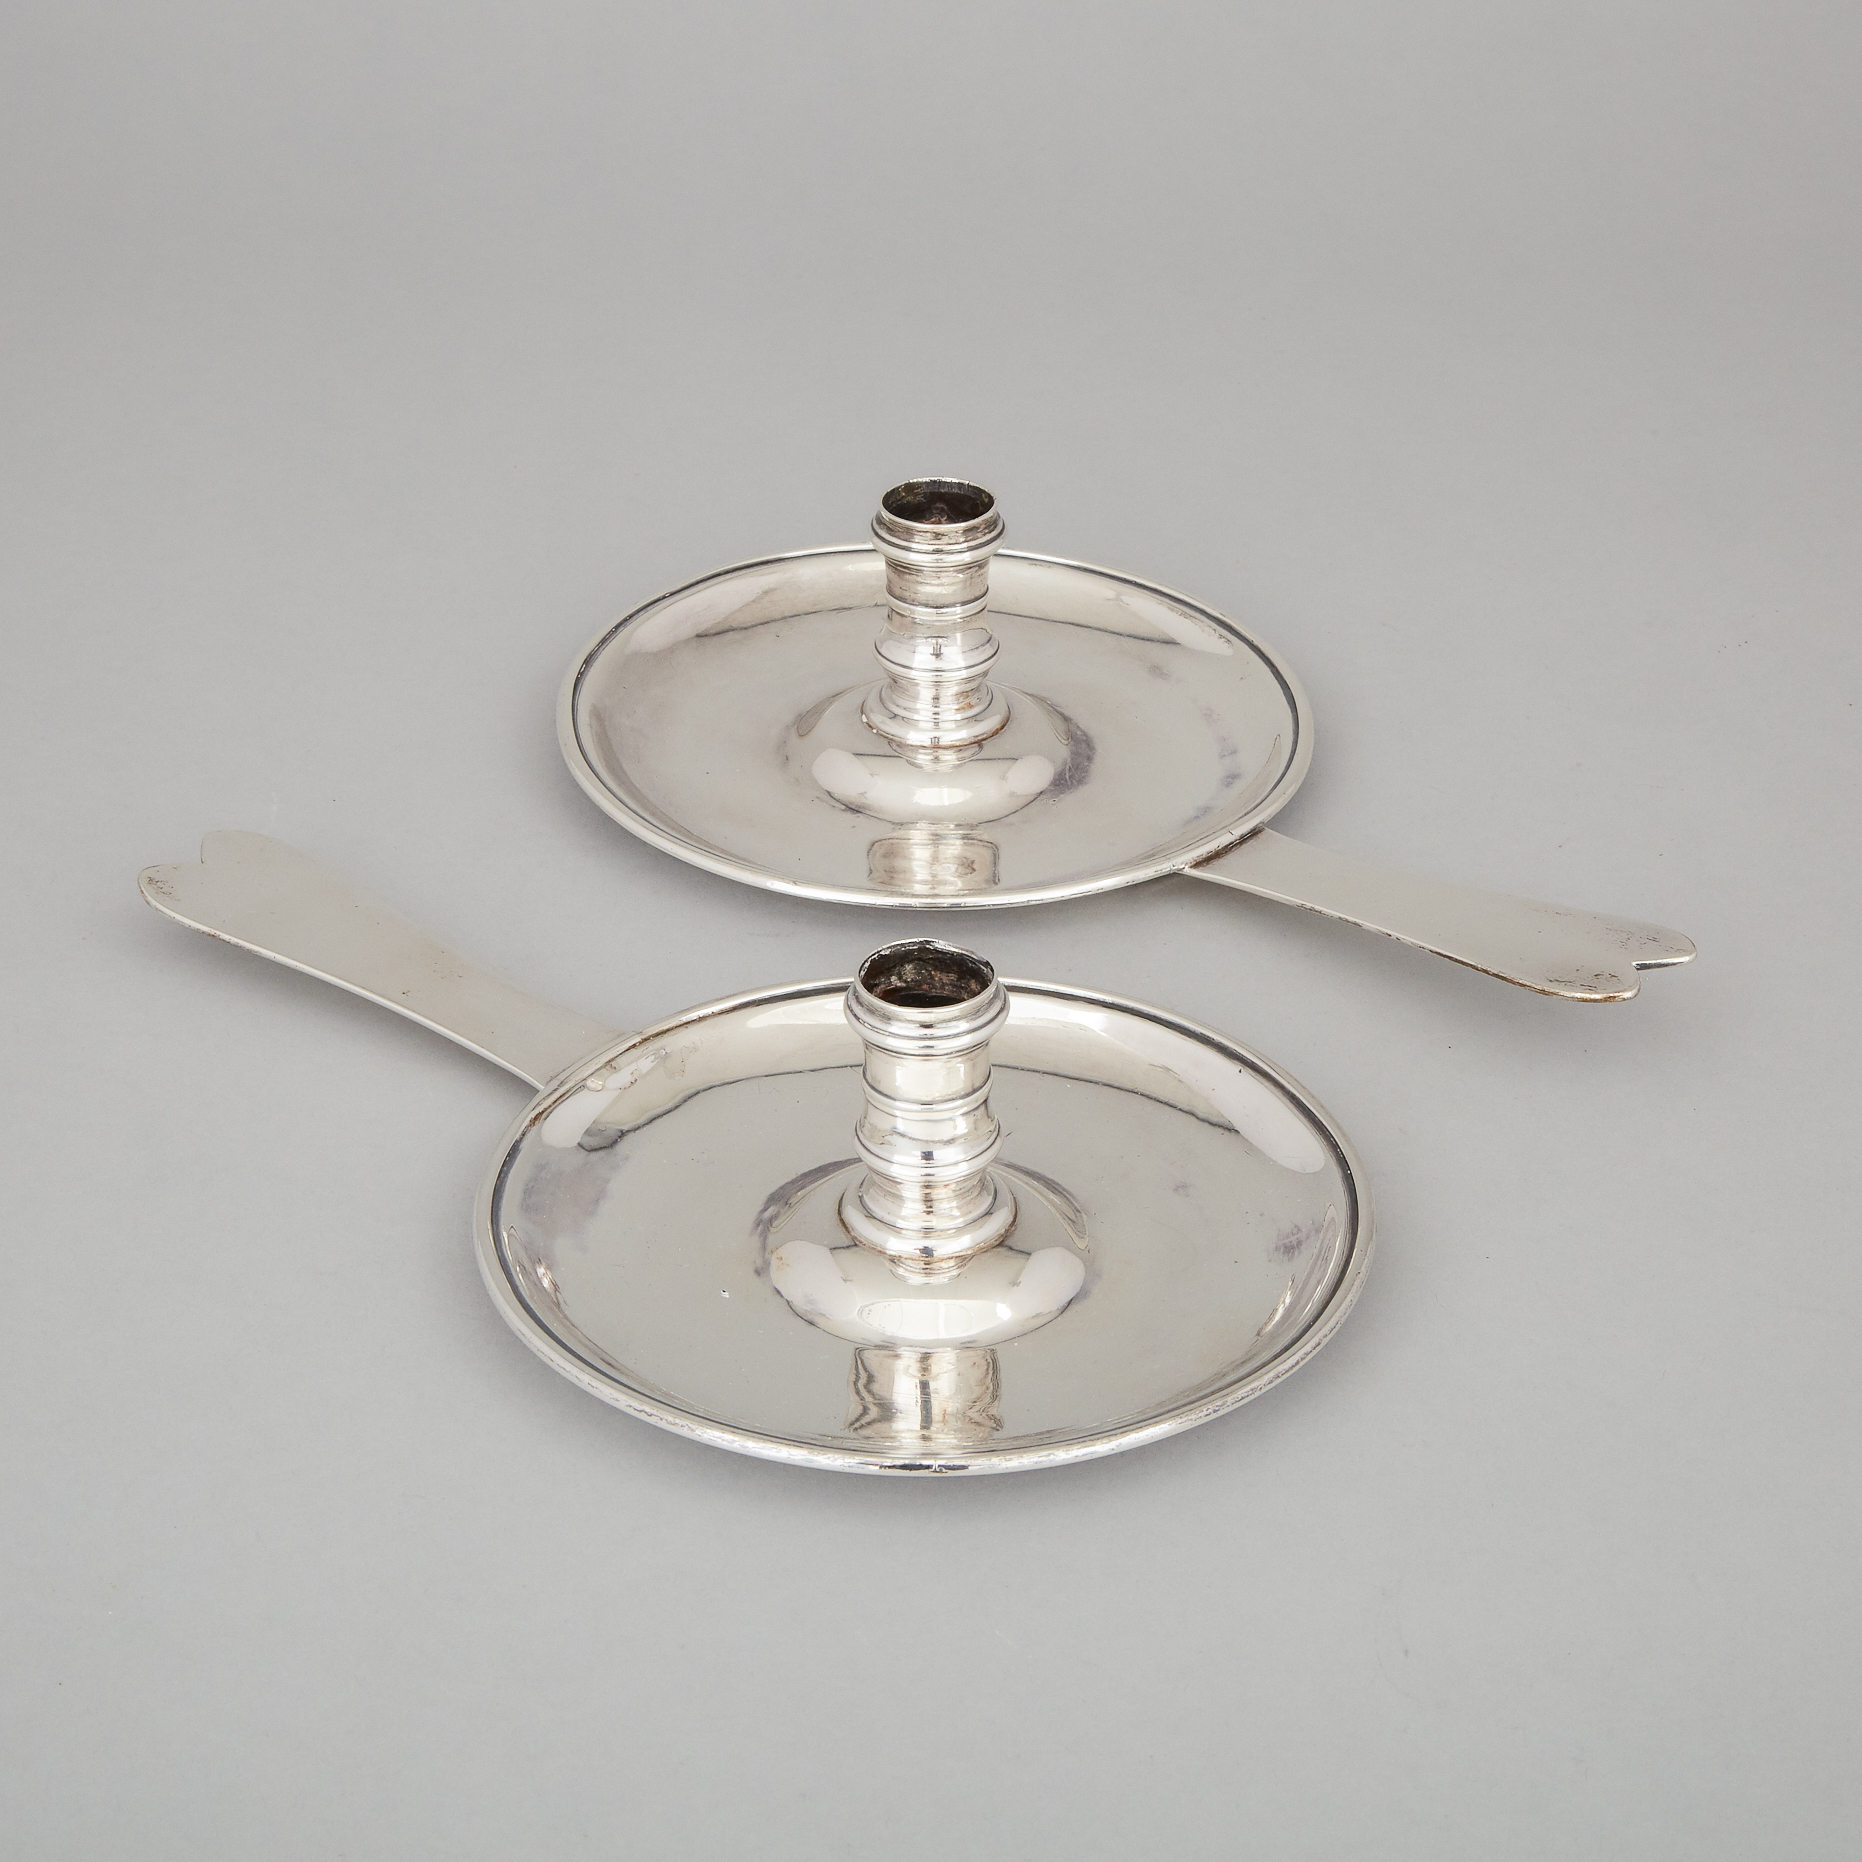 Pair of George III Silver Chamber Candlesticks, Augustin Le Sage, London, 1768